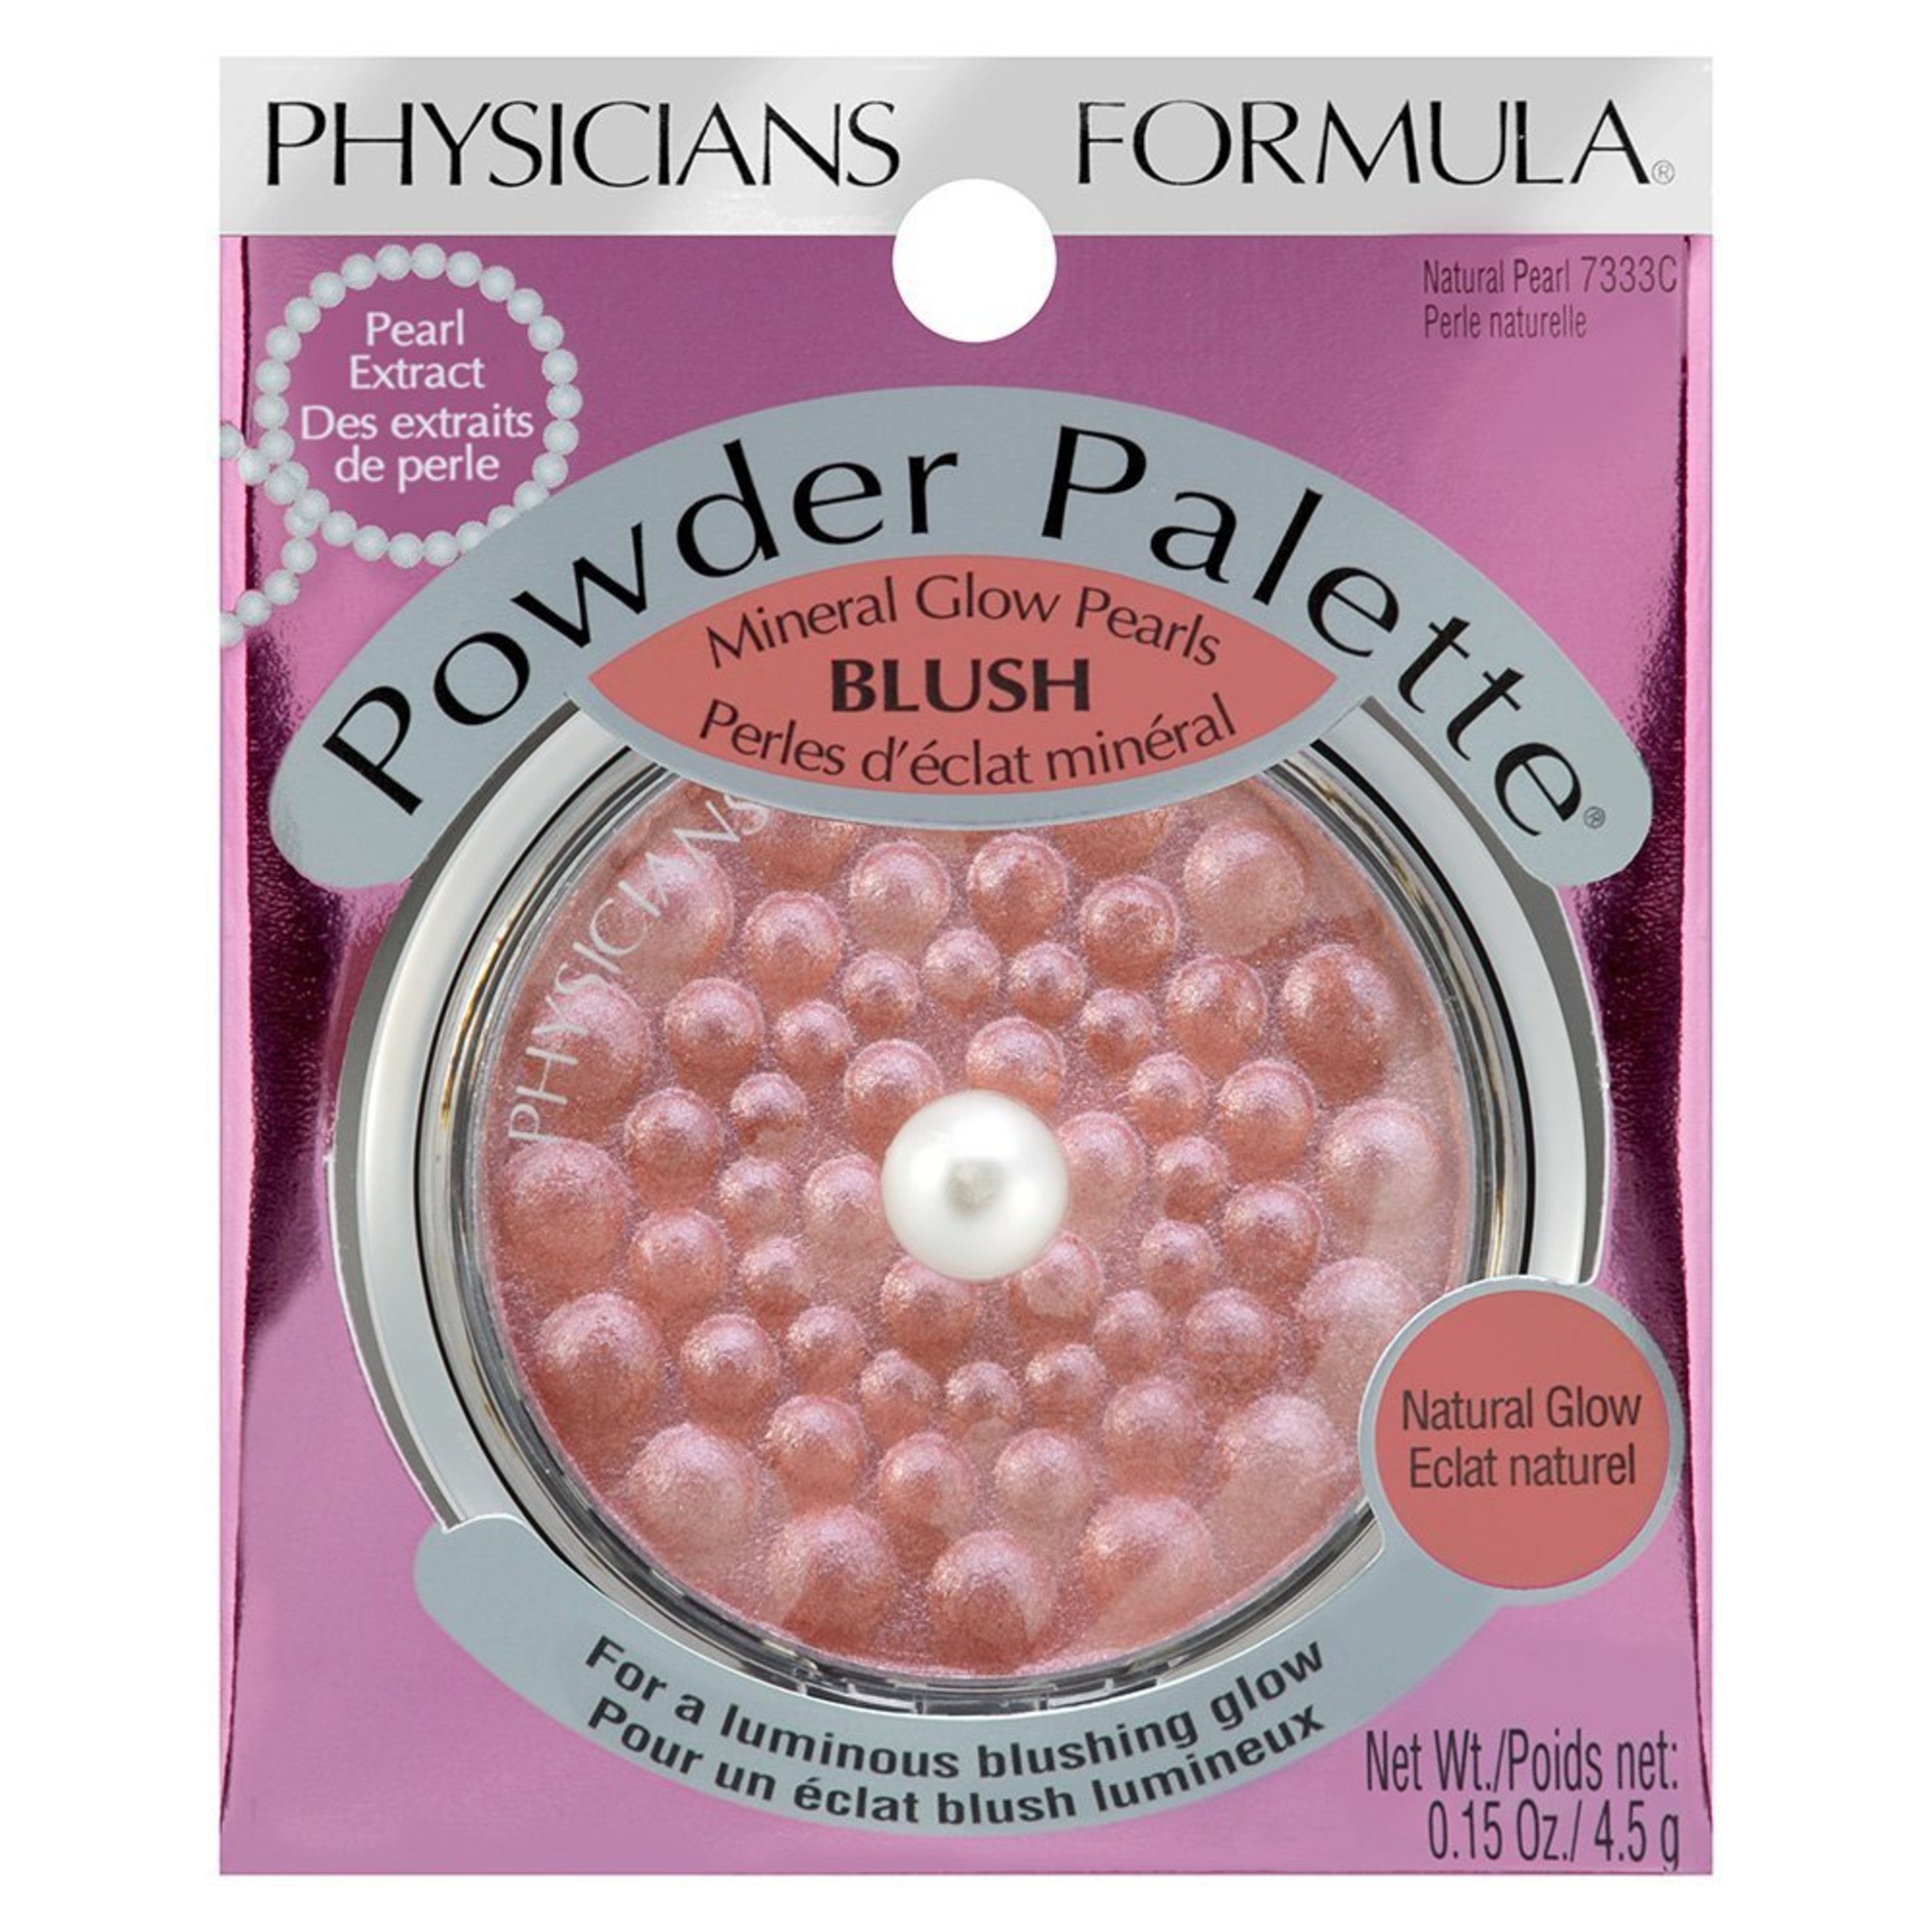 Physicians Formula Powder Palette® Mineral Glow Pearls Blush, Natural Pearl - image 4 of 6